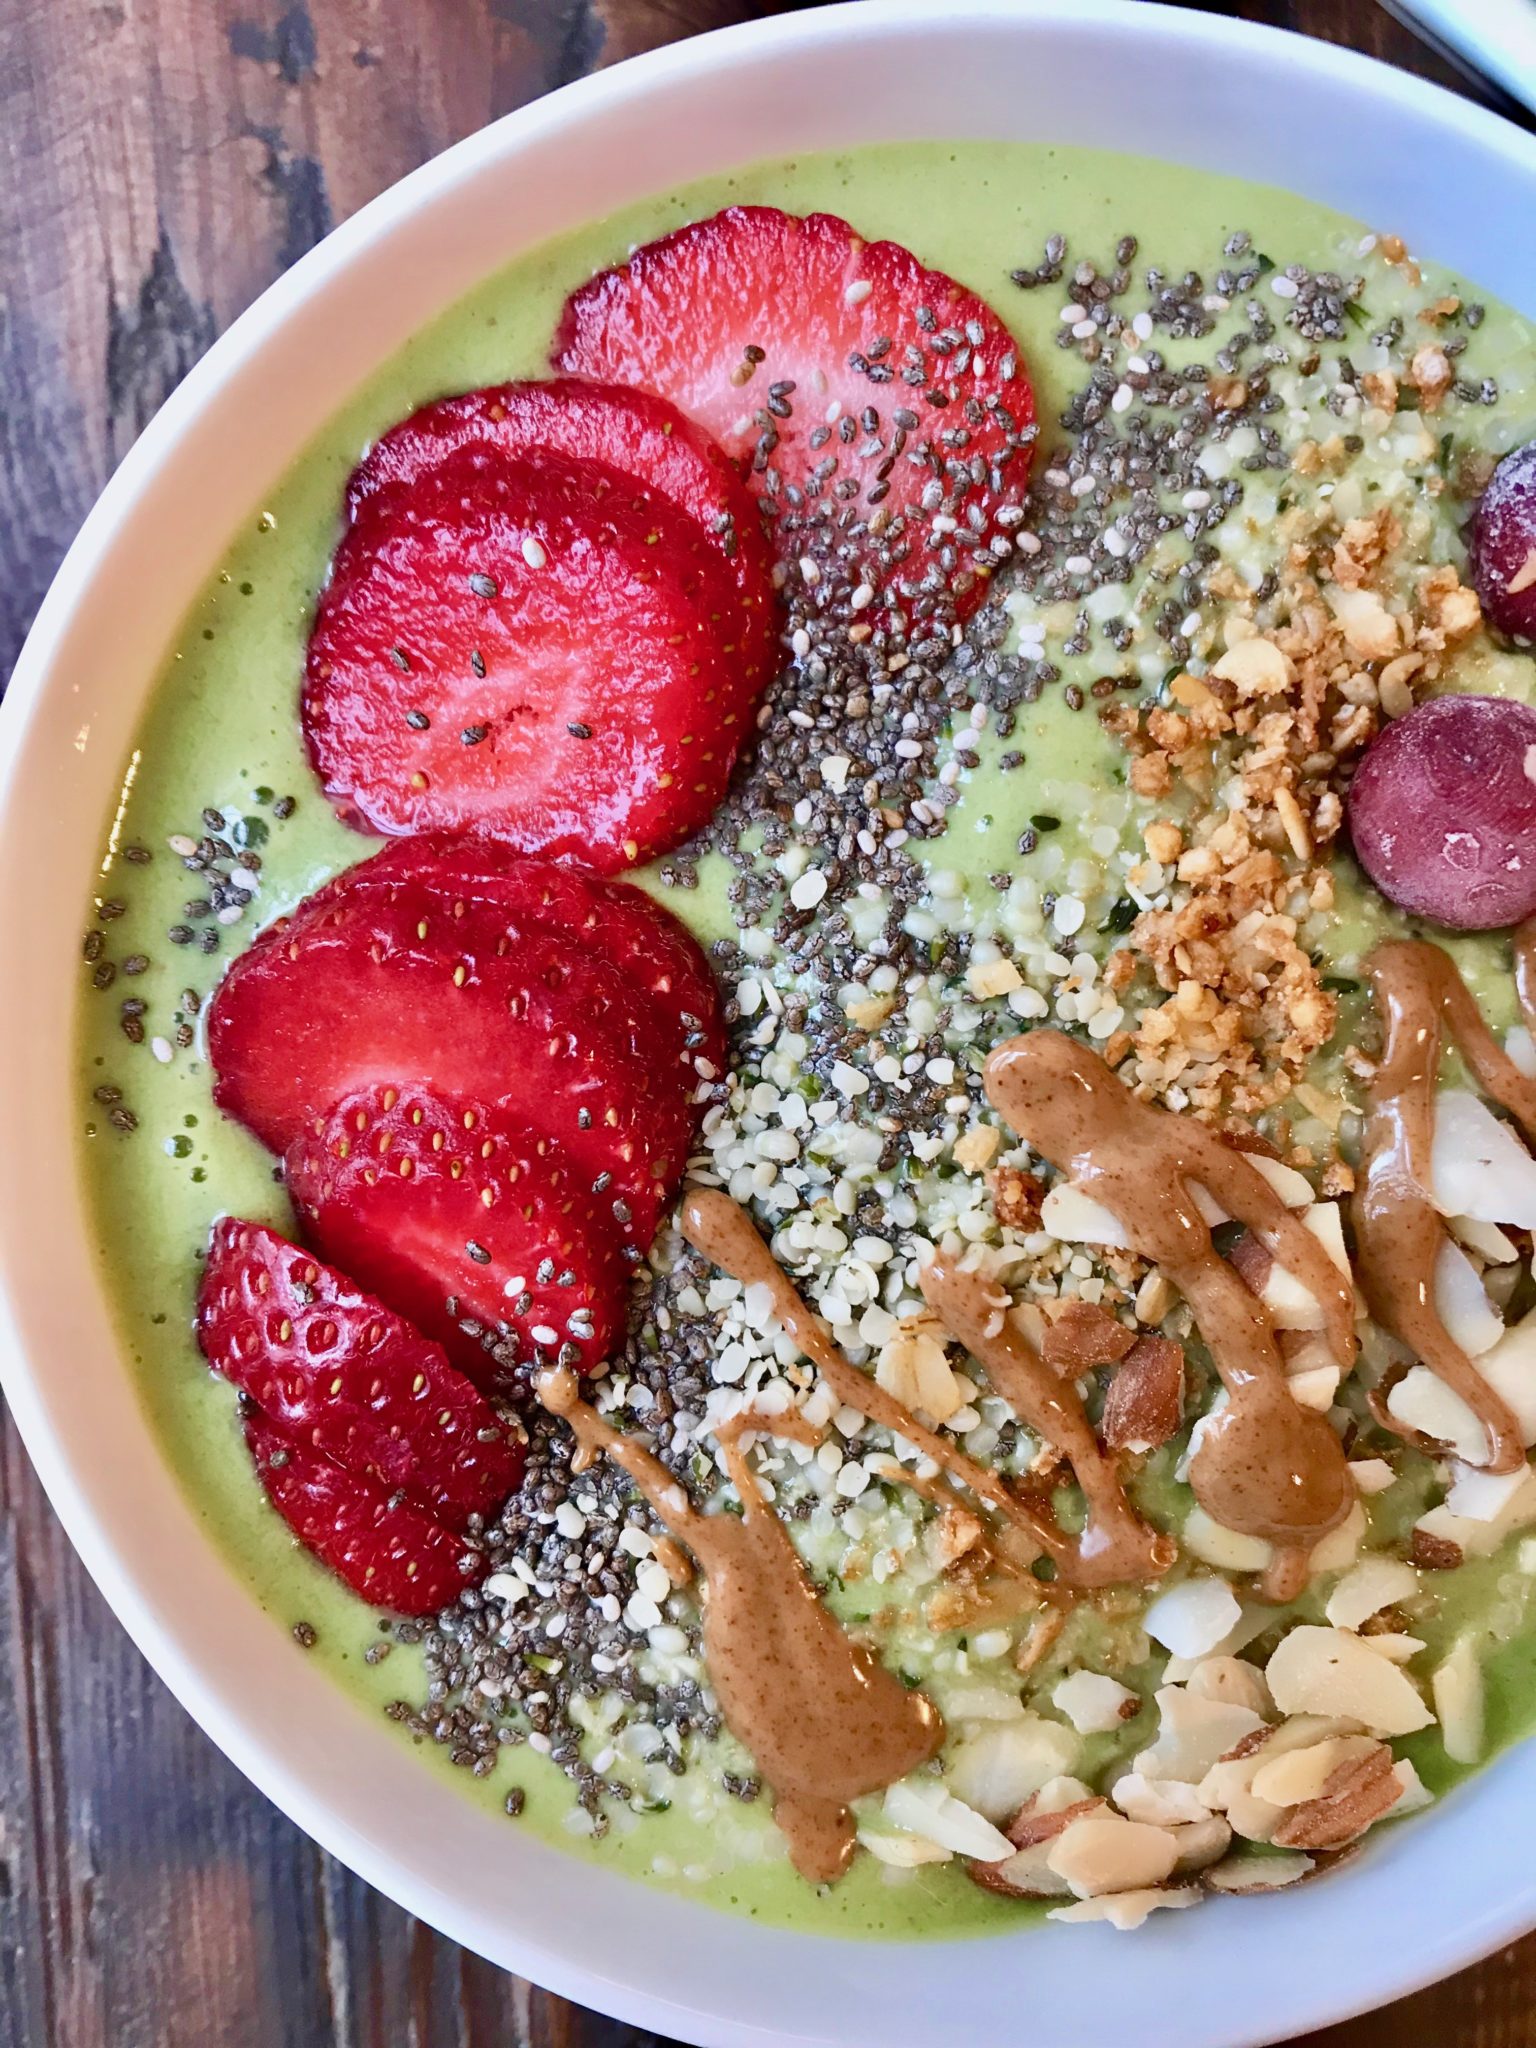 How to make a green smoothie bowl